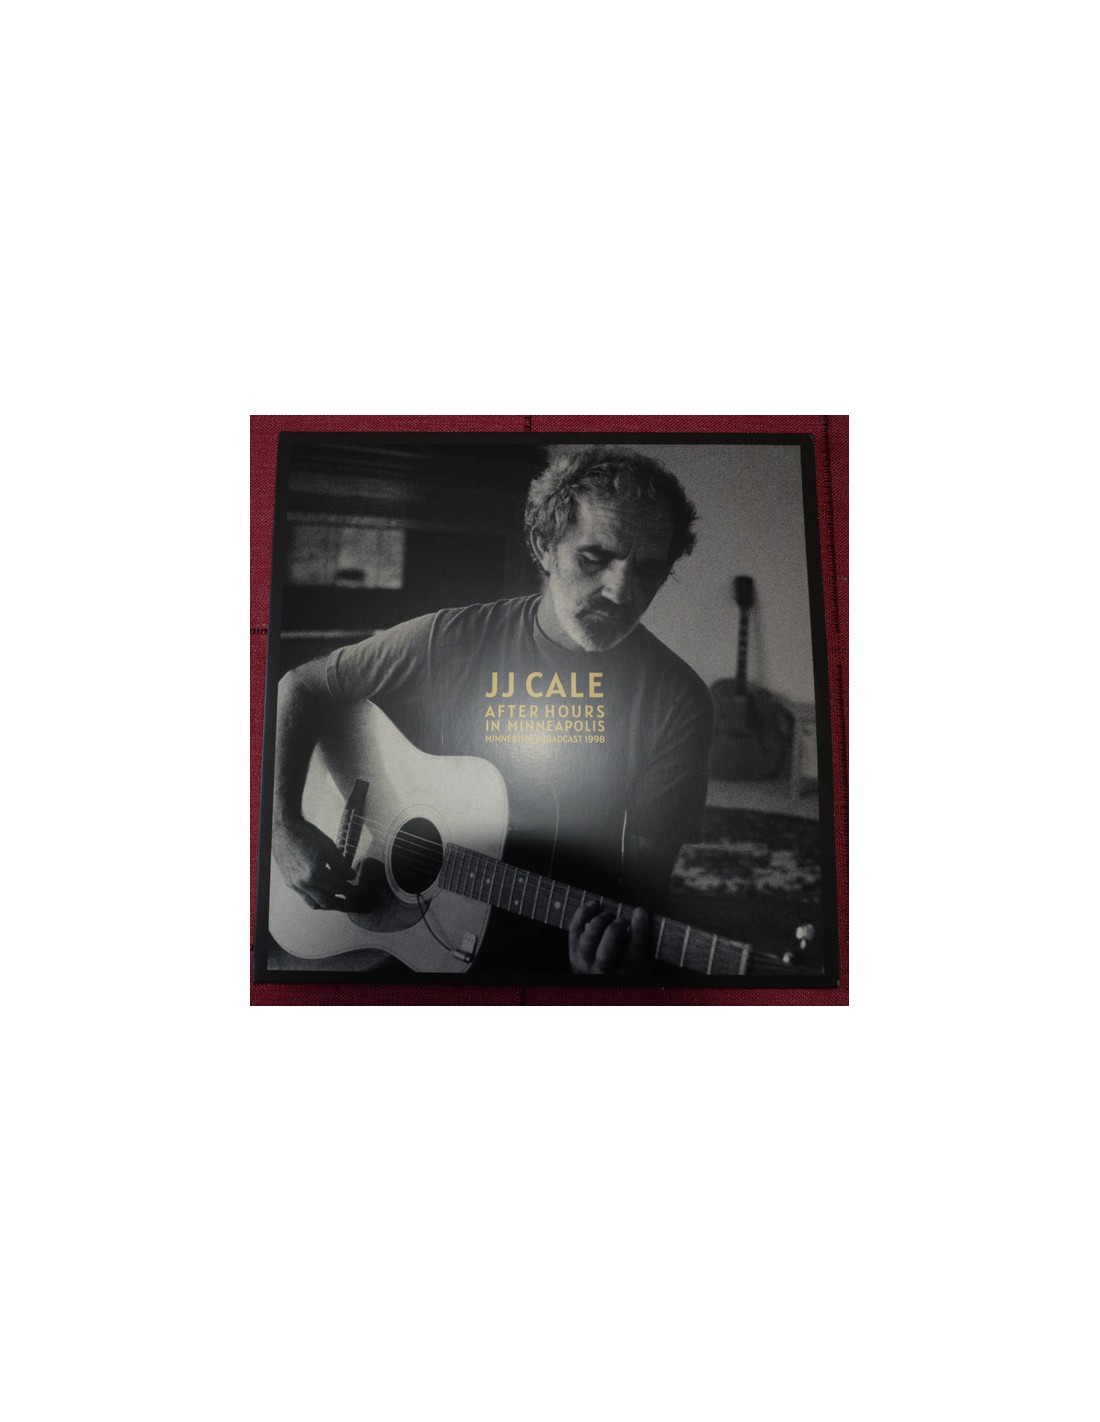 JJ Cale After Hours in Minneapolis Minnestoa Broadcast 1998 2 LP